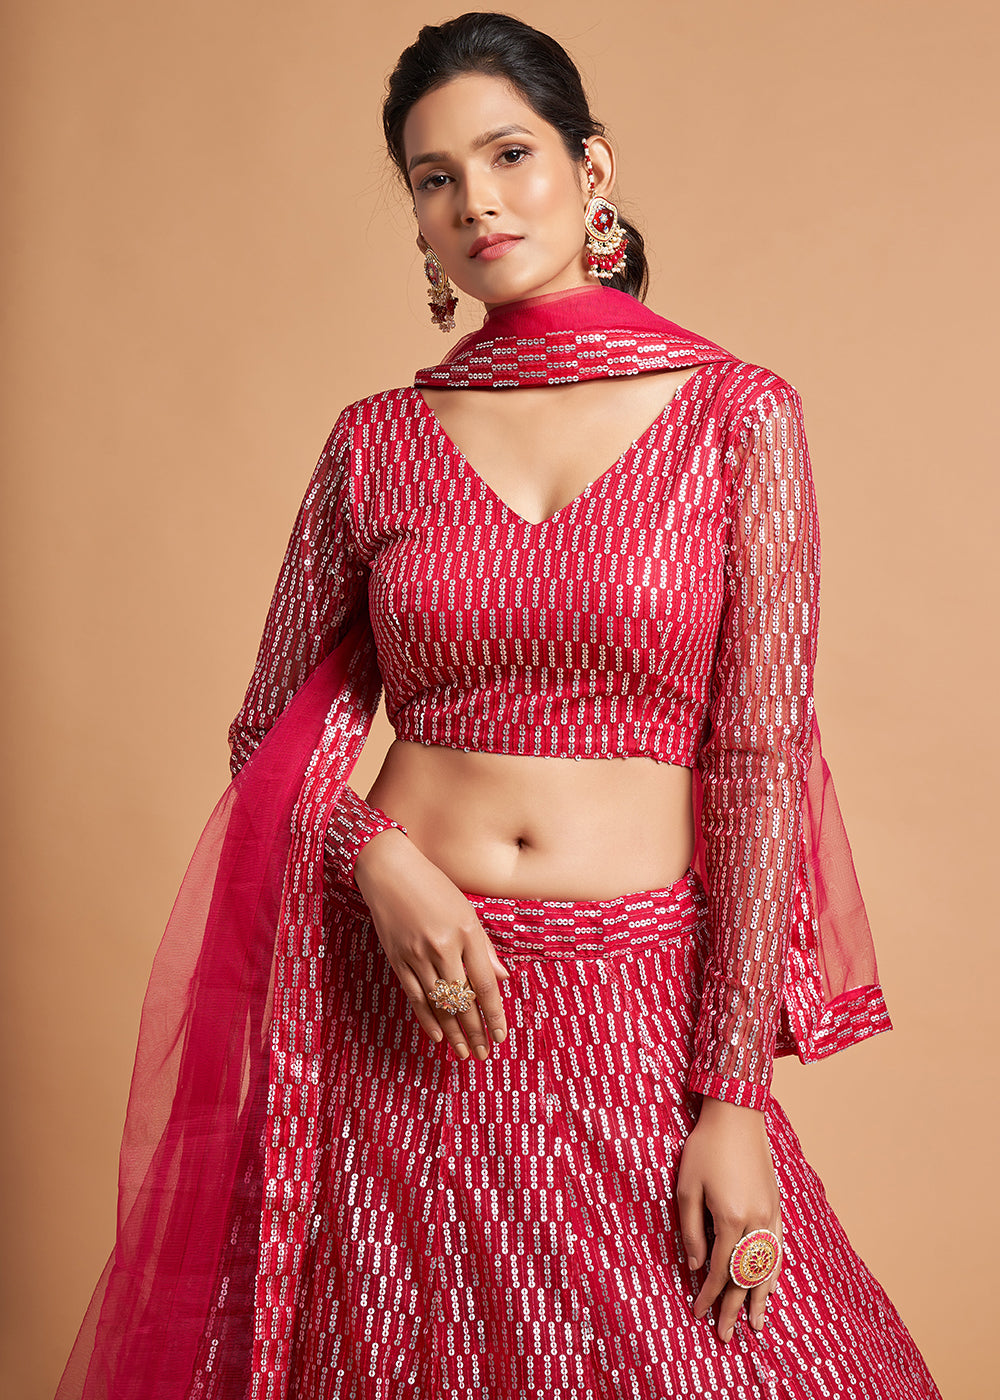 Fresh lehenga blouse designs - New Trending Ideas to give your choli a  modern look | Ruffle blouse designs, Latest lehenga blouse designs, Lehenga  blouse designs